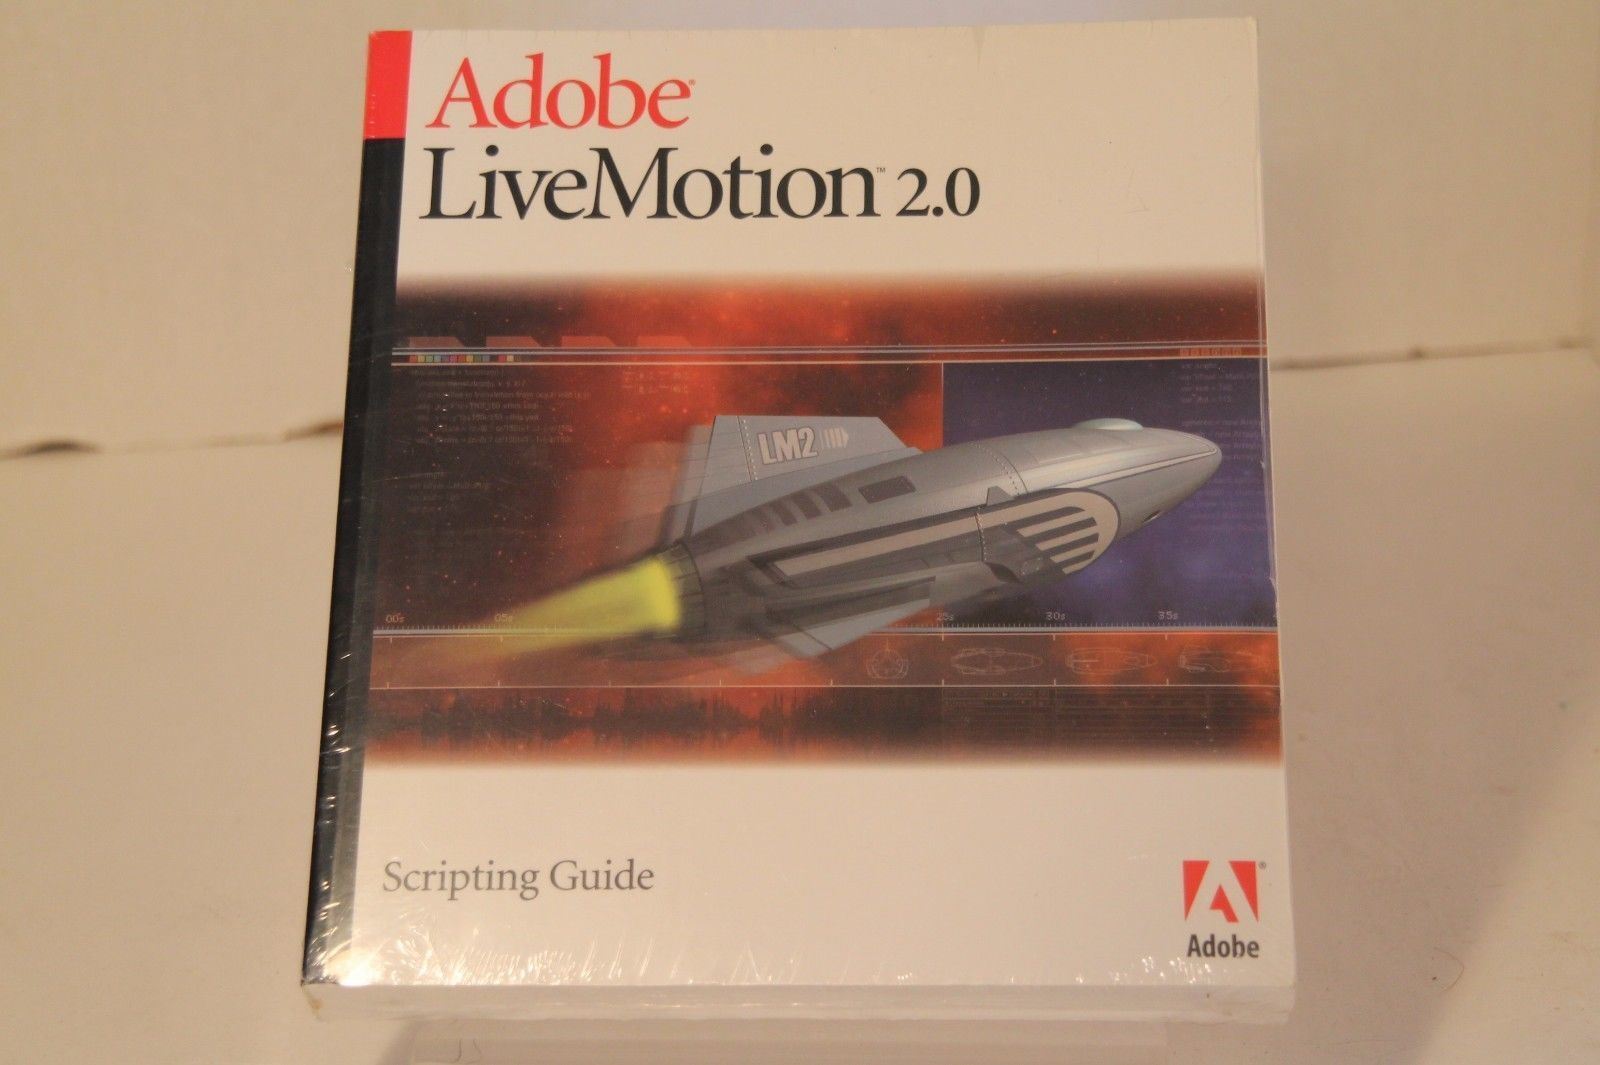 Adobe LiveMotion 2.0 Scripting Guide Sealed New Professional Web Graphics Book